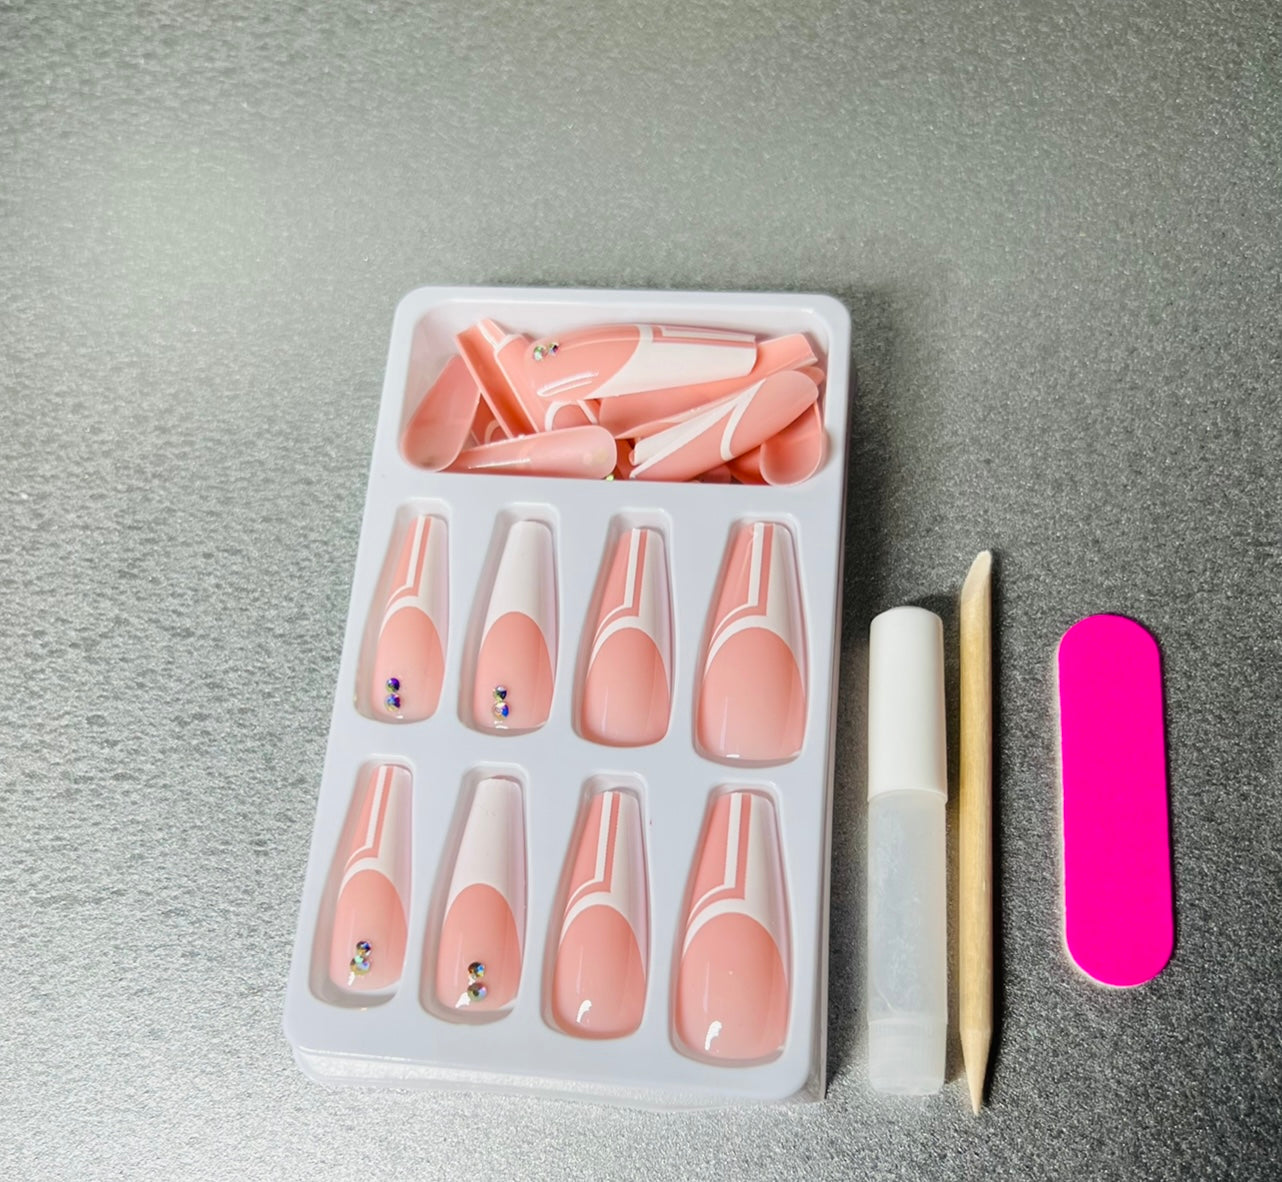 24 press on nails, glue, wooden cuticle pusher, and mini file